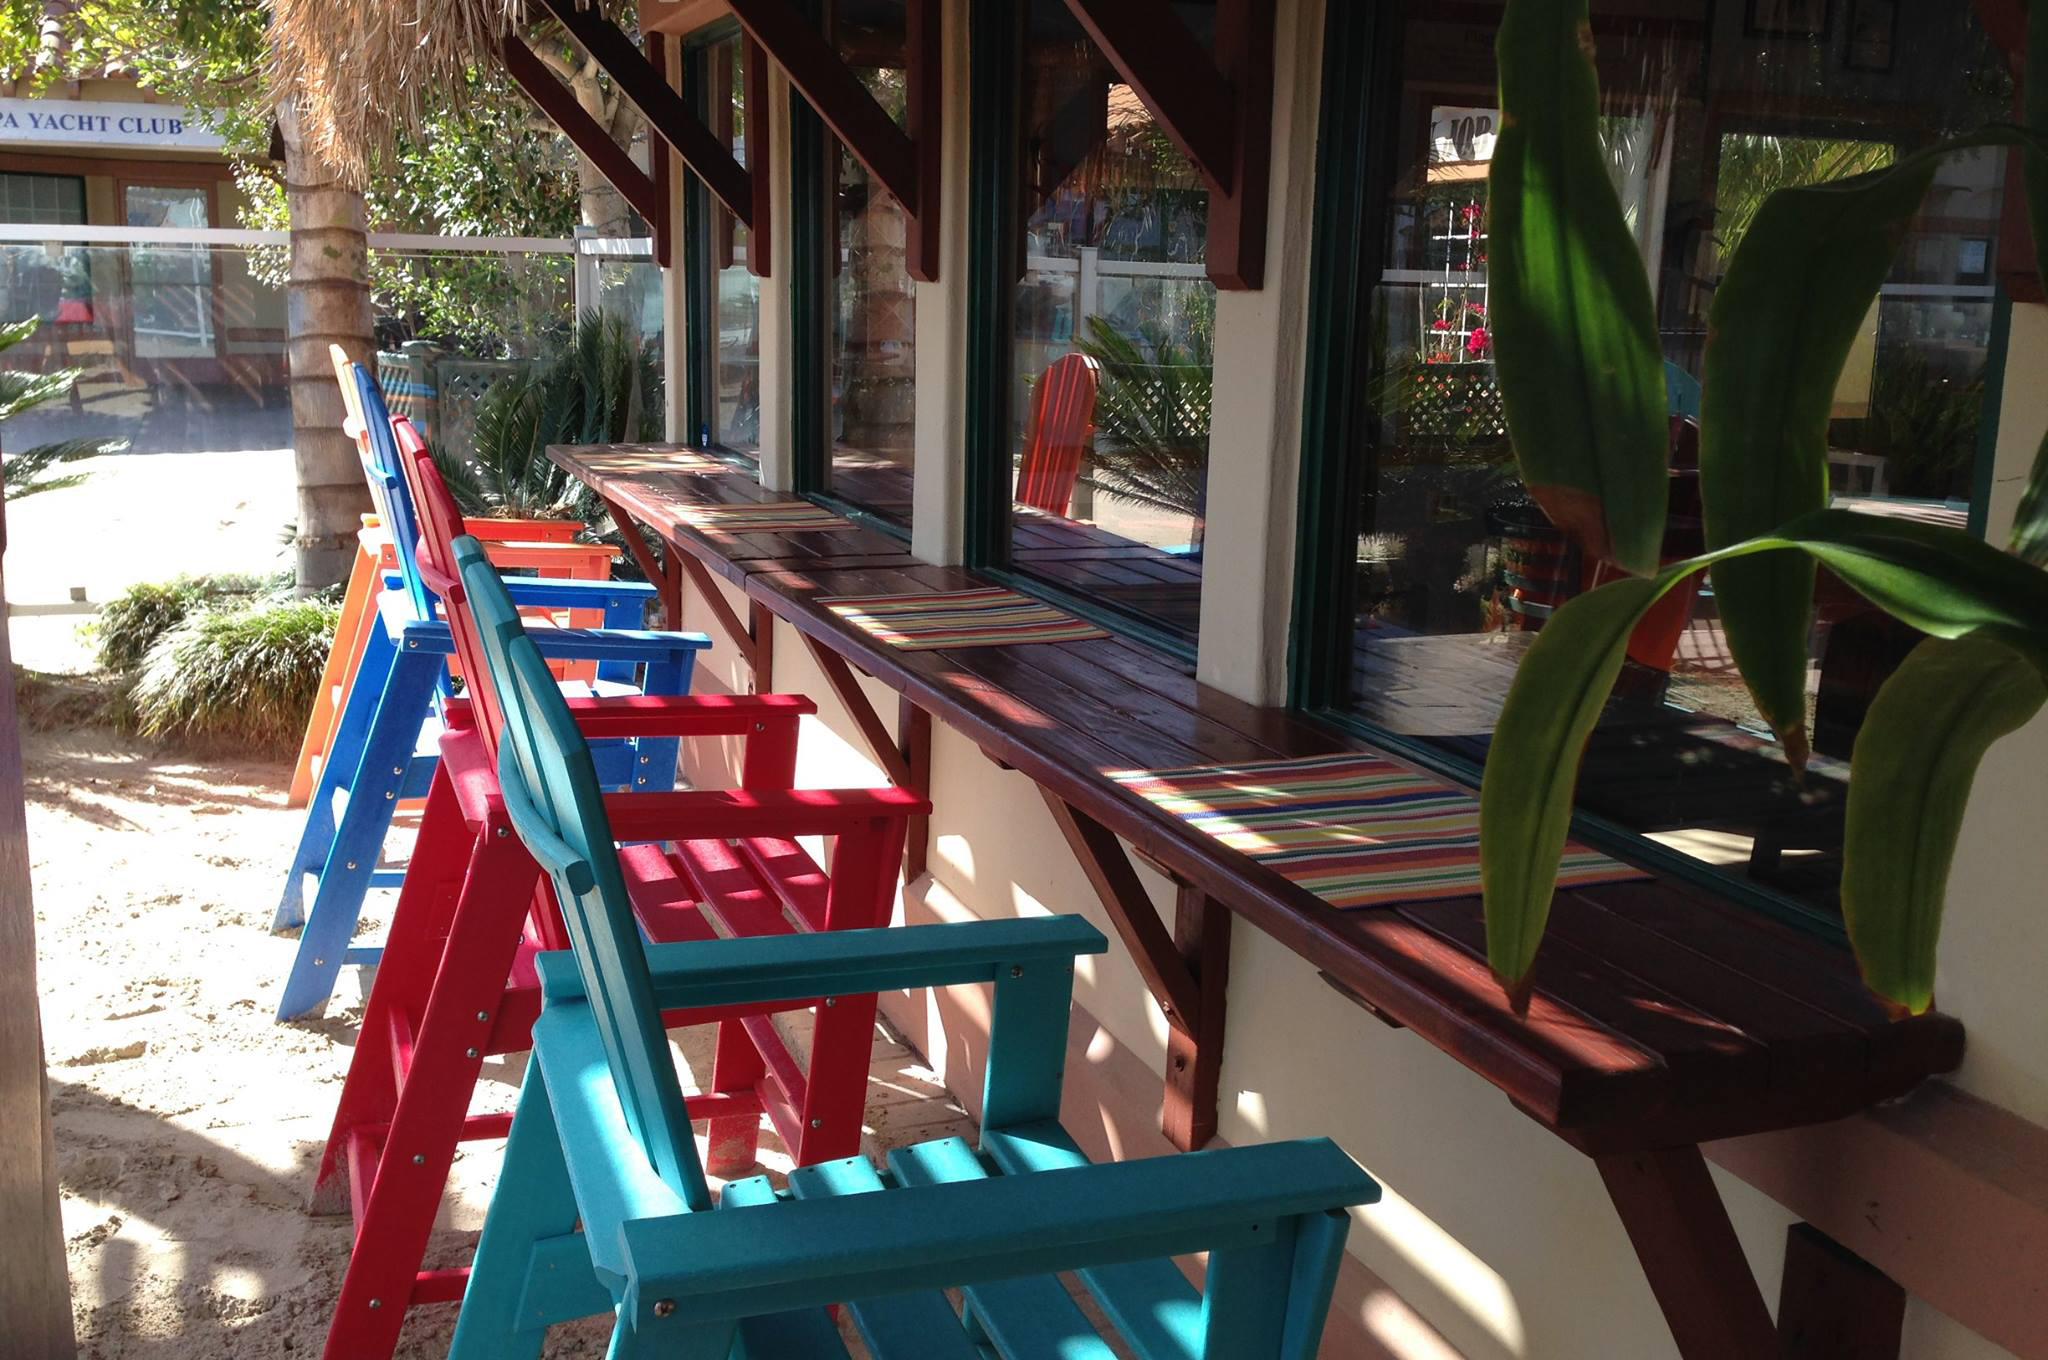 Colorfully painted chairs line Mrs. Olson's Coffee Hut bar